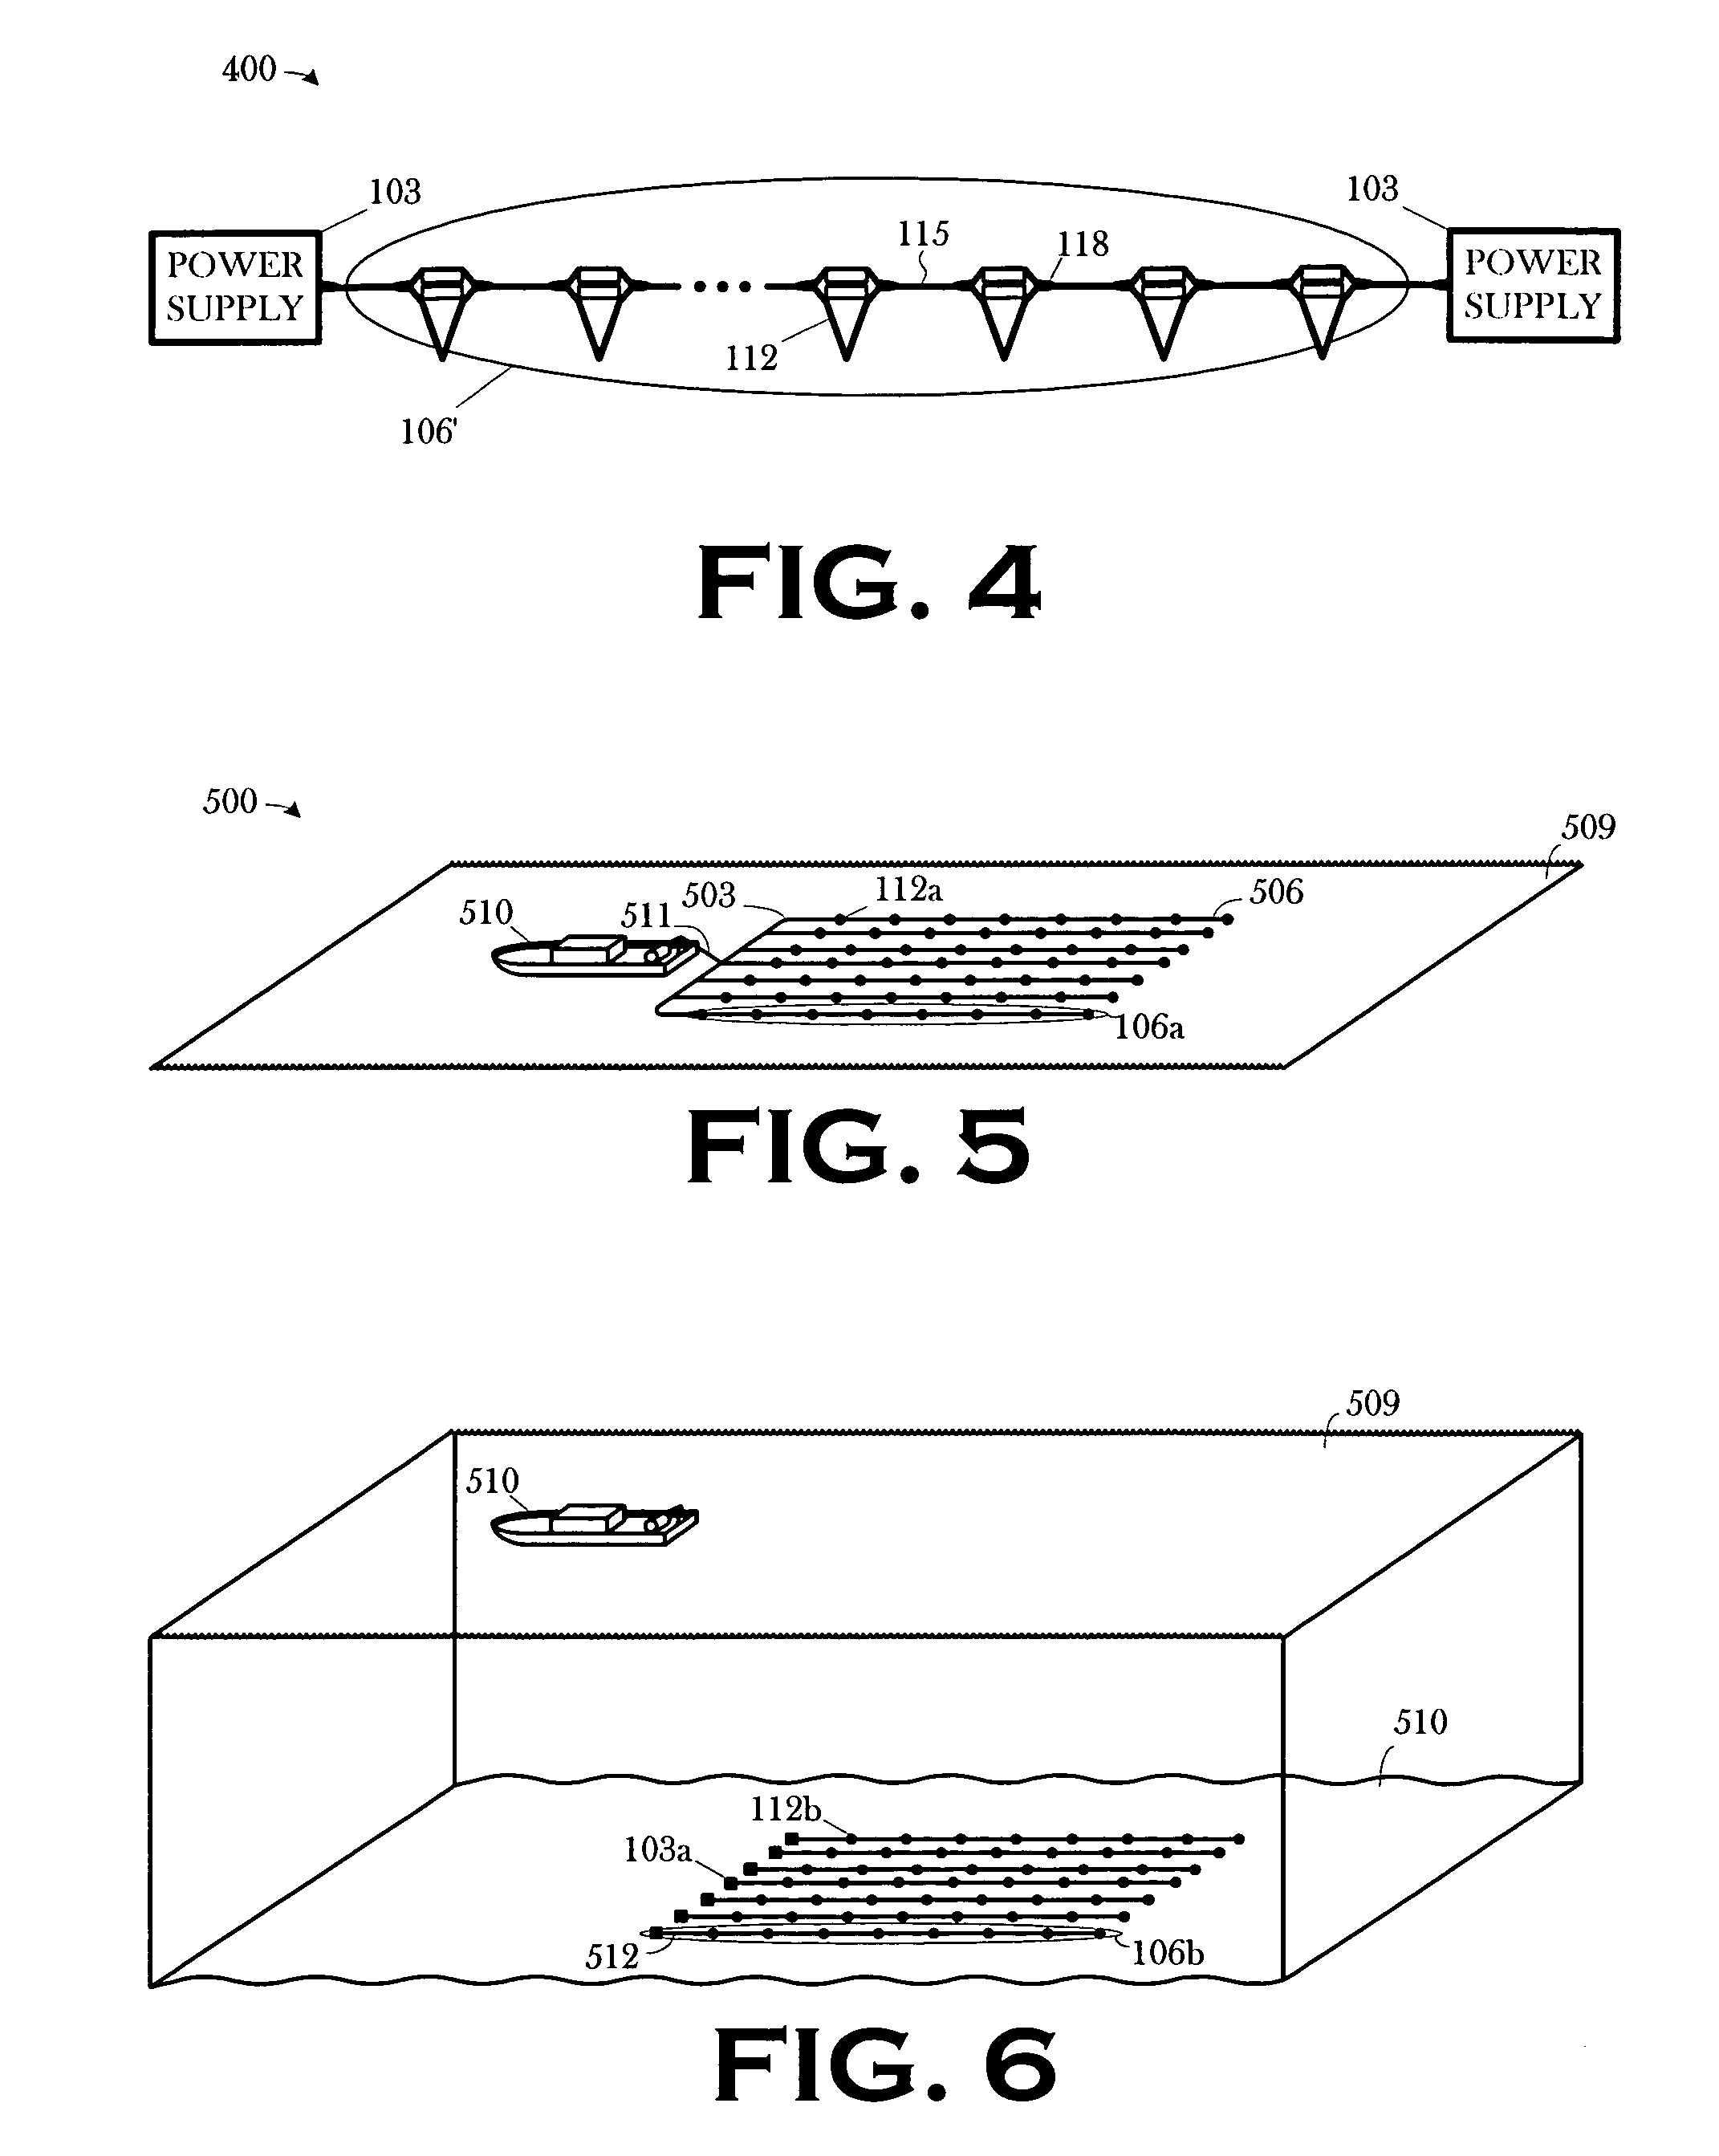 Short circuit protection for serially connected nodes in a hdyrocarbon exploration or production electrical system